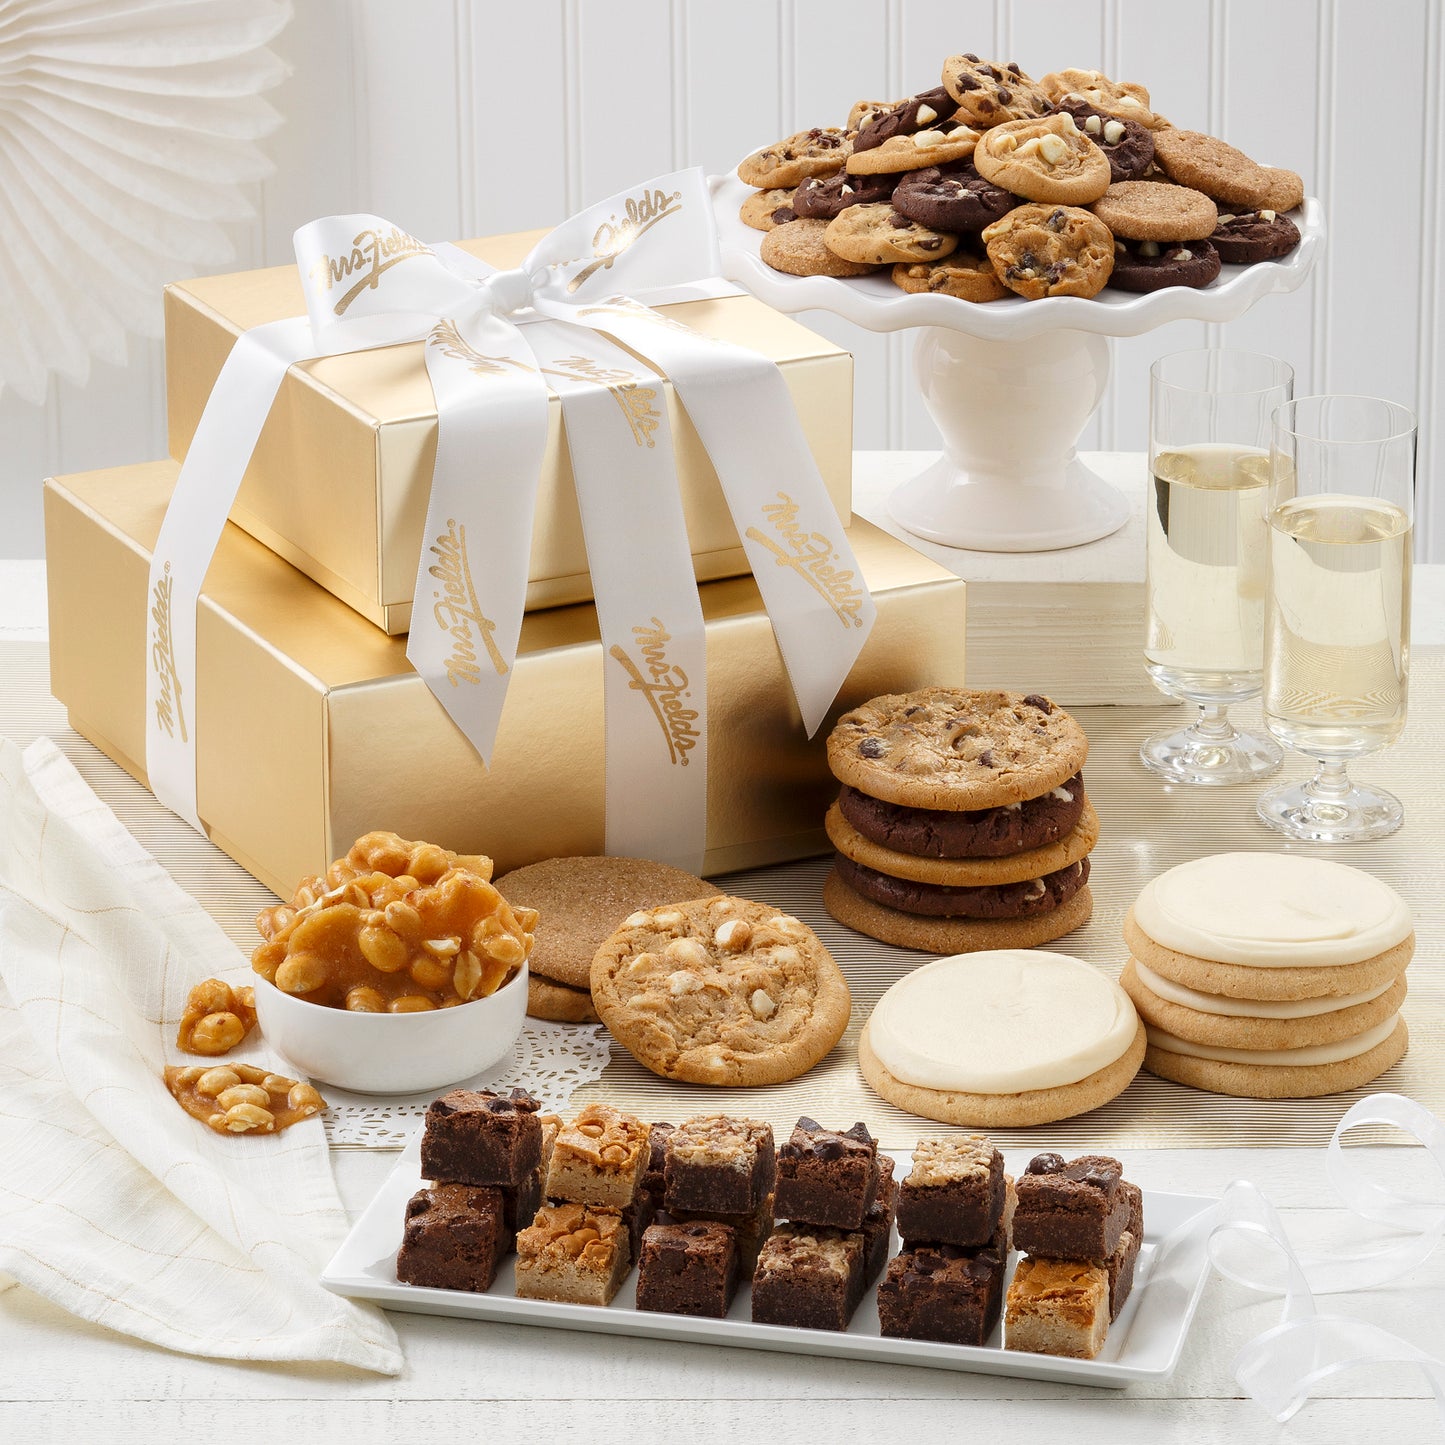 A two-tier gold box tower tied with a white and gold Mrs. Fields ribbon and surrounded by an assortment of Nibblers®, original cookies, four frosted cookies, and peanut brittle.